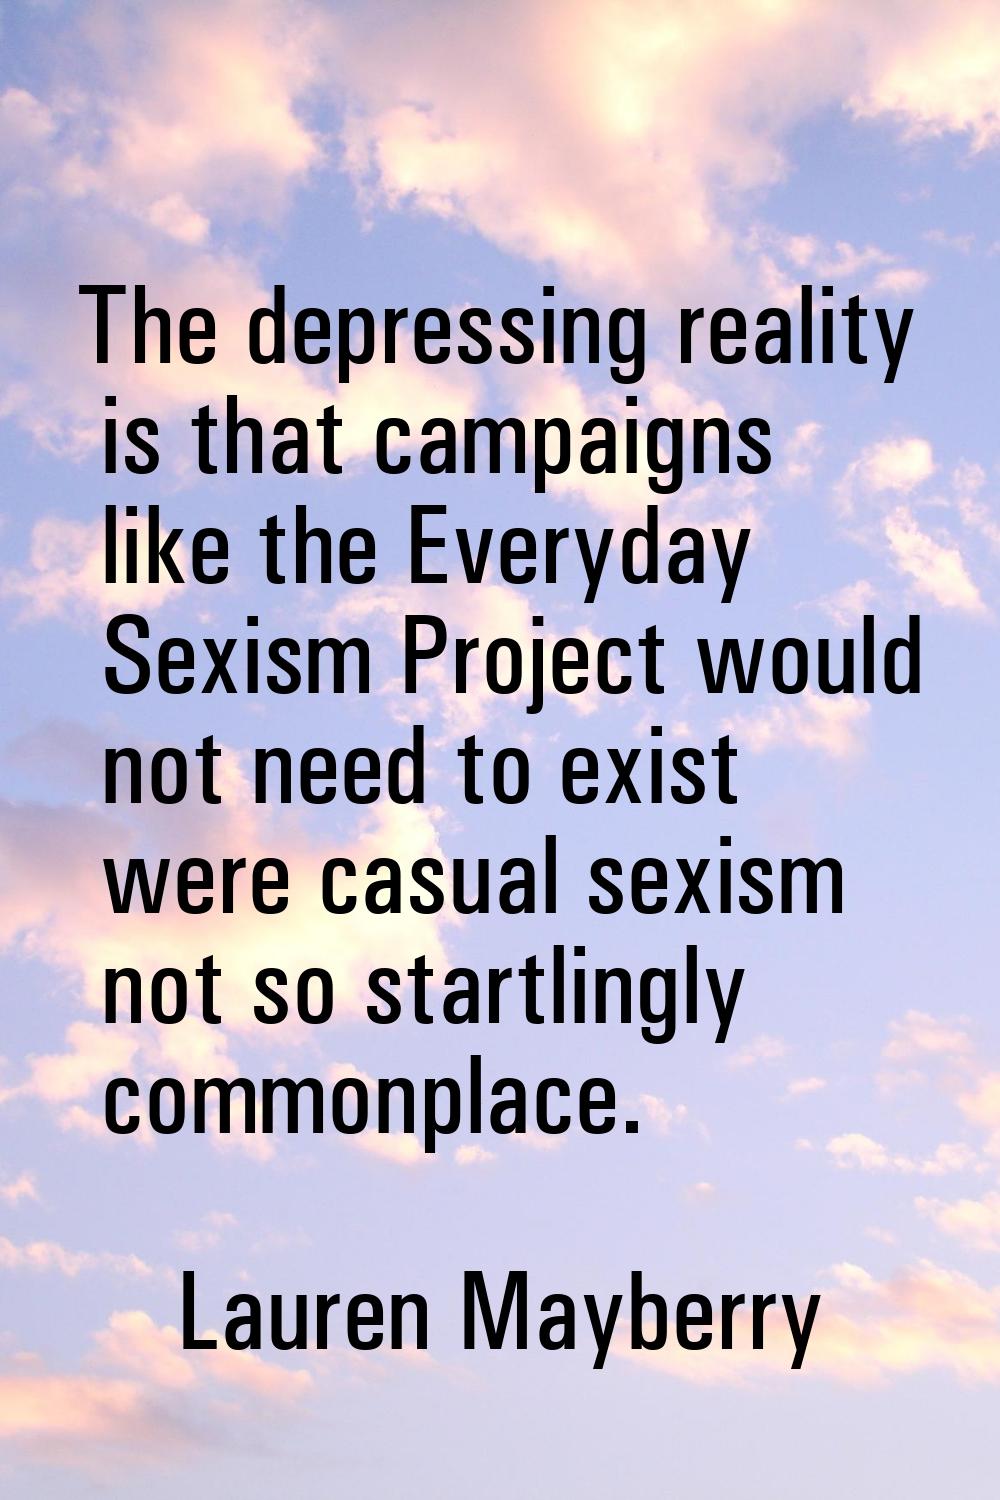 The depressing reality is that campaigns like the Everyday Sexism Project would not need to exist w